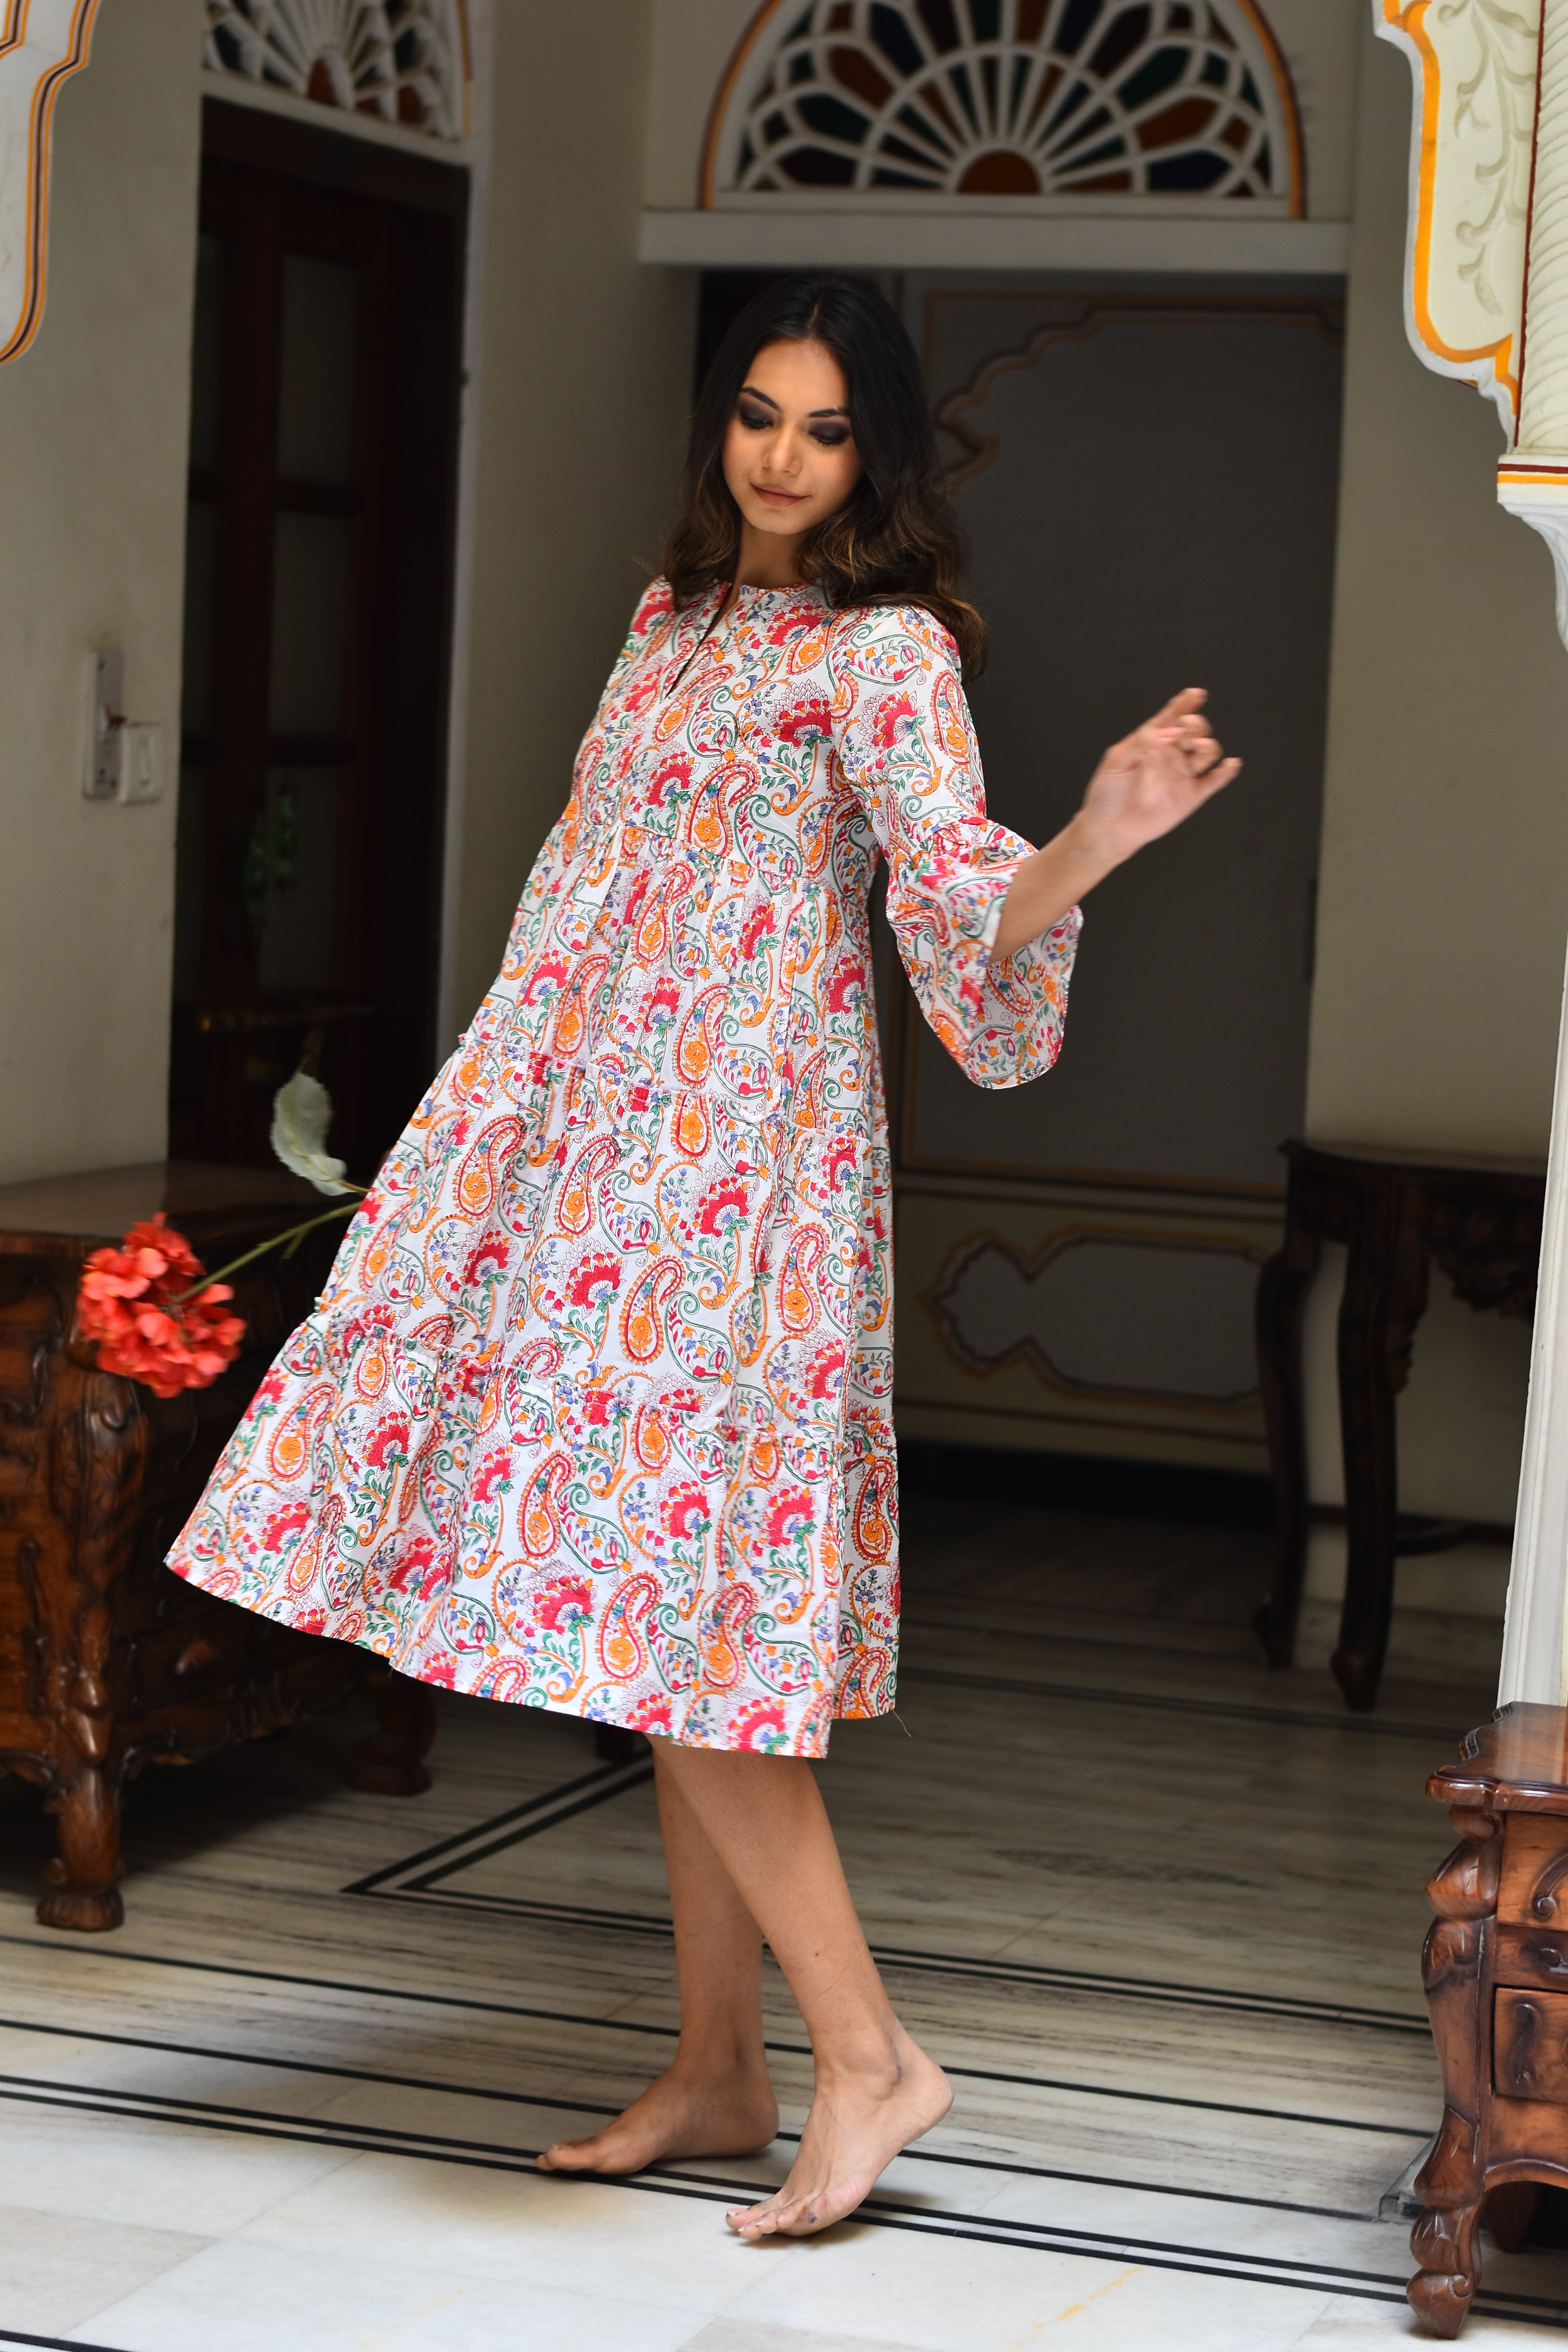 "Cotton midi dress: Handcrafted elegance with long sleeves, showcasing artisanal expertise."